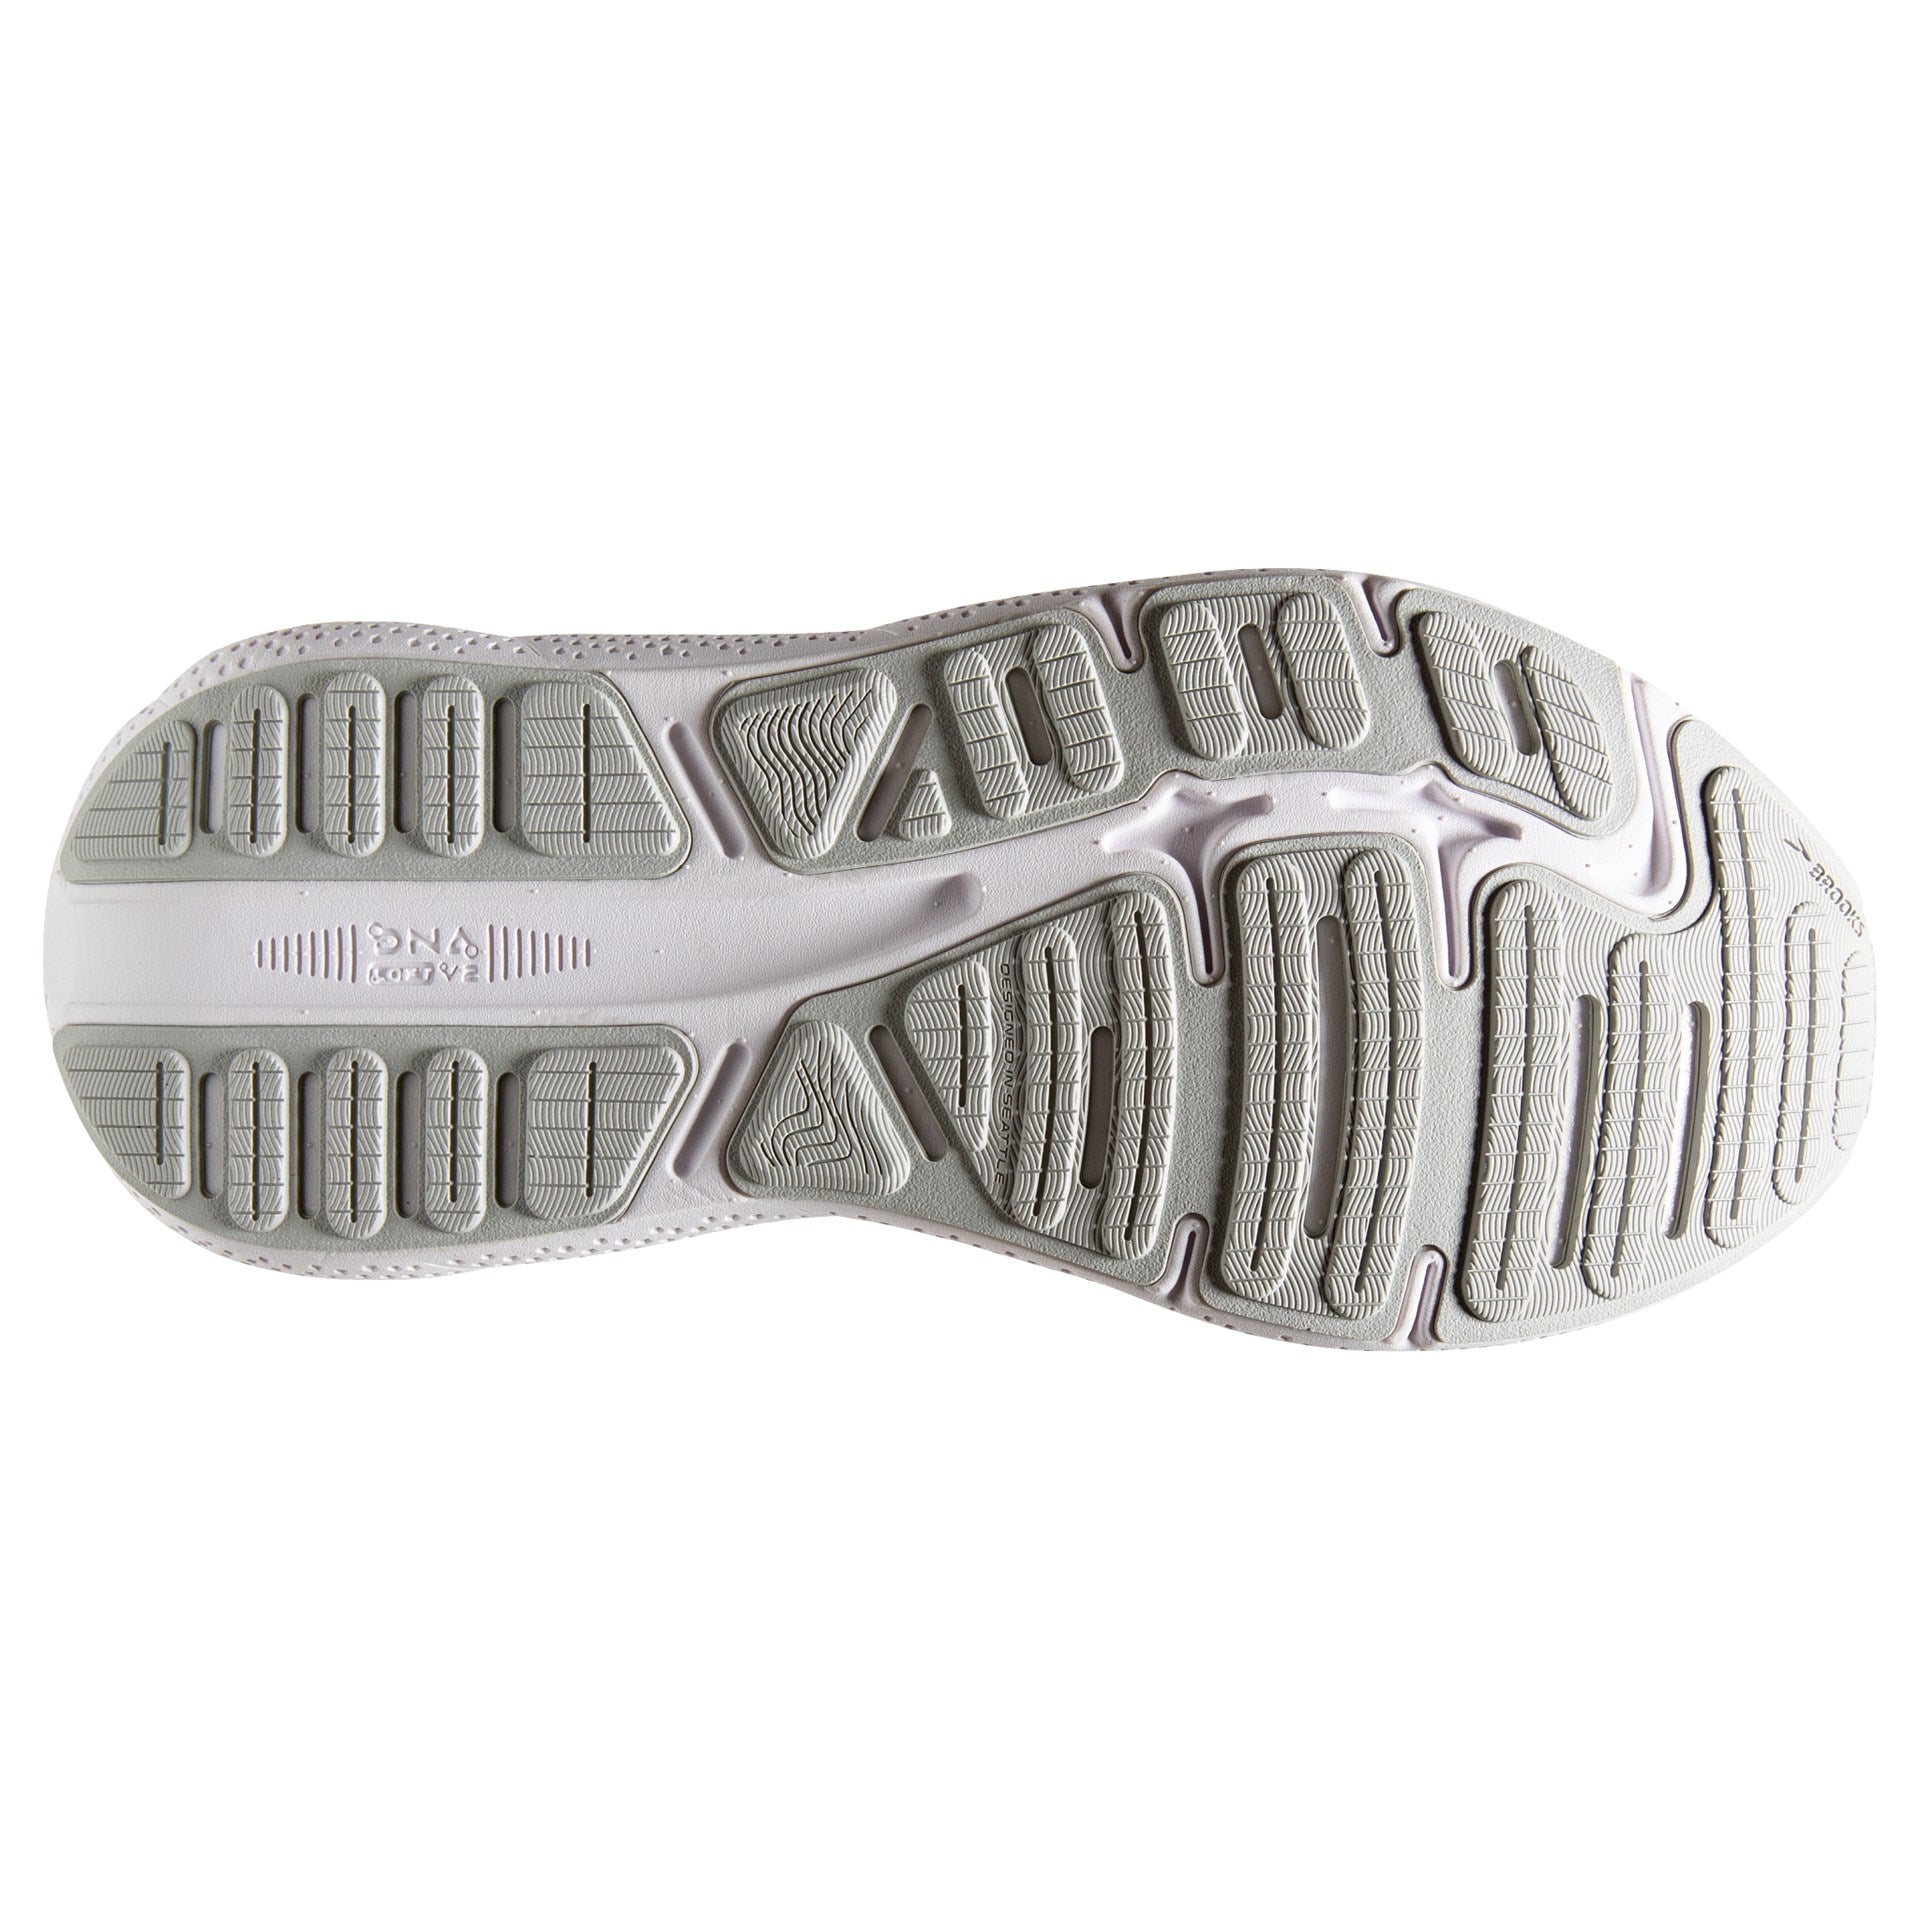 BROOKS MEN'S GHOST MAX - D - 124 WHITE/OYSTER/METALLIC SILVER 